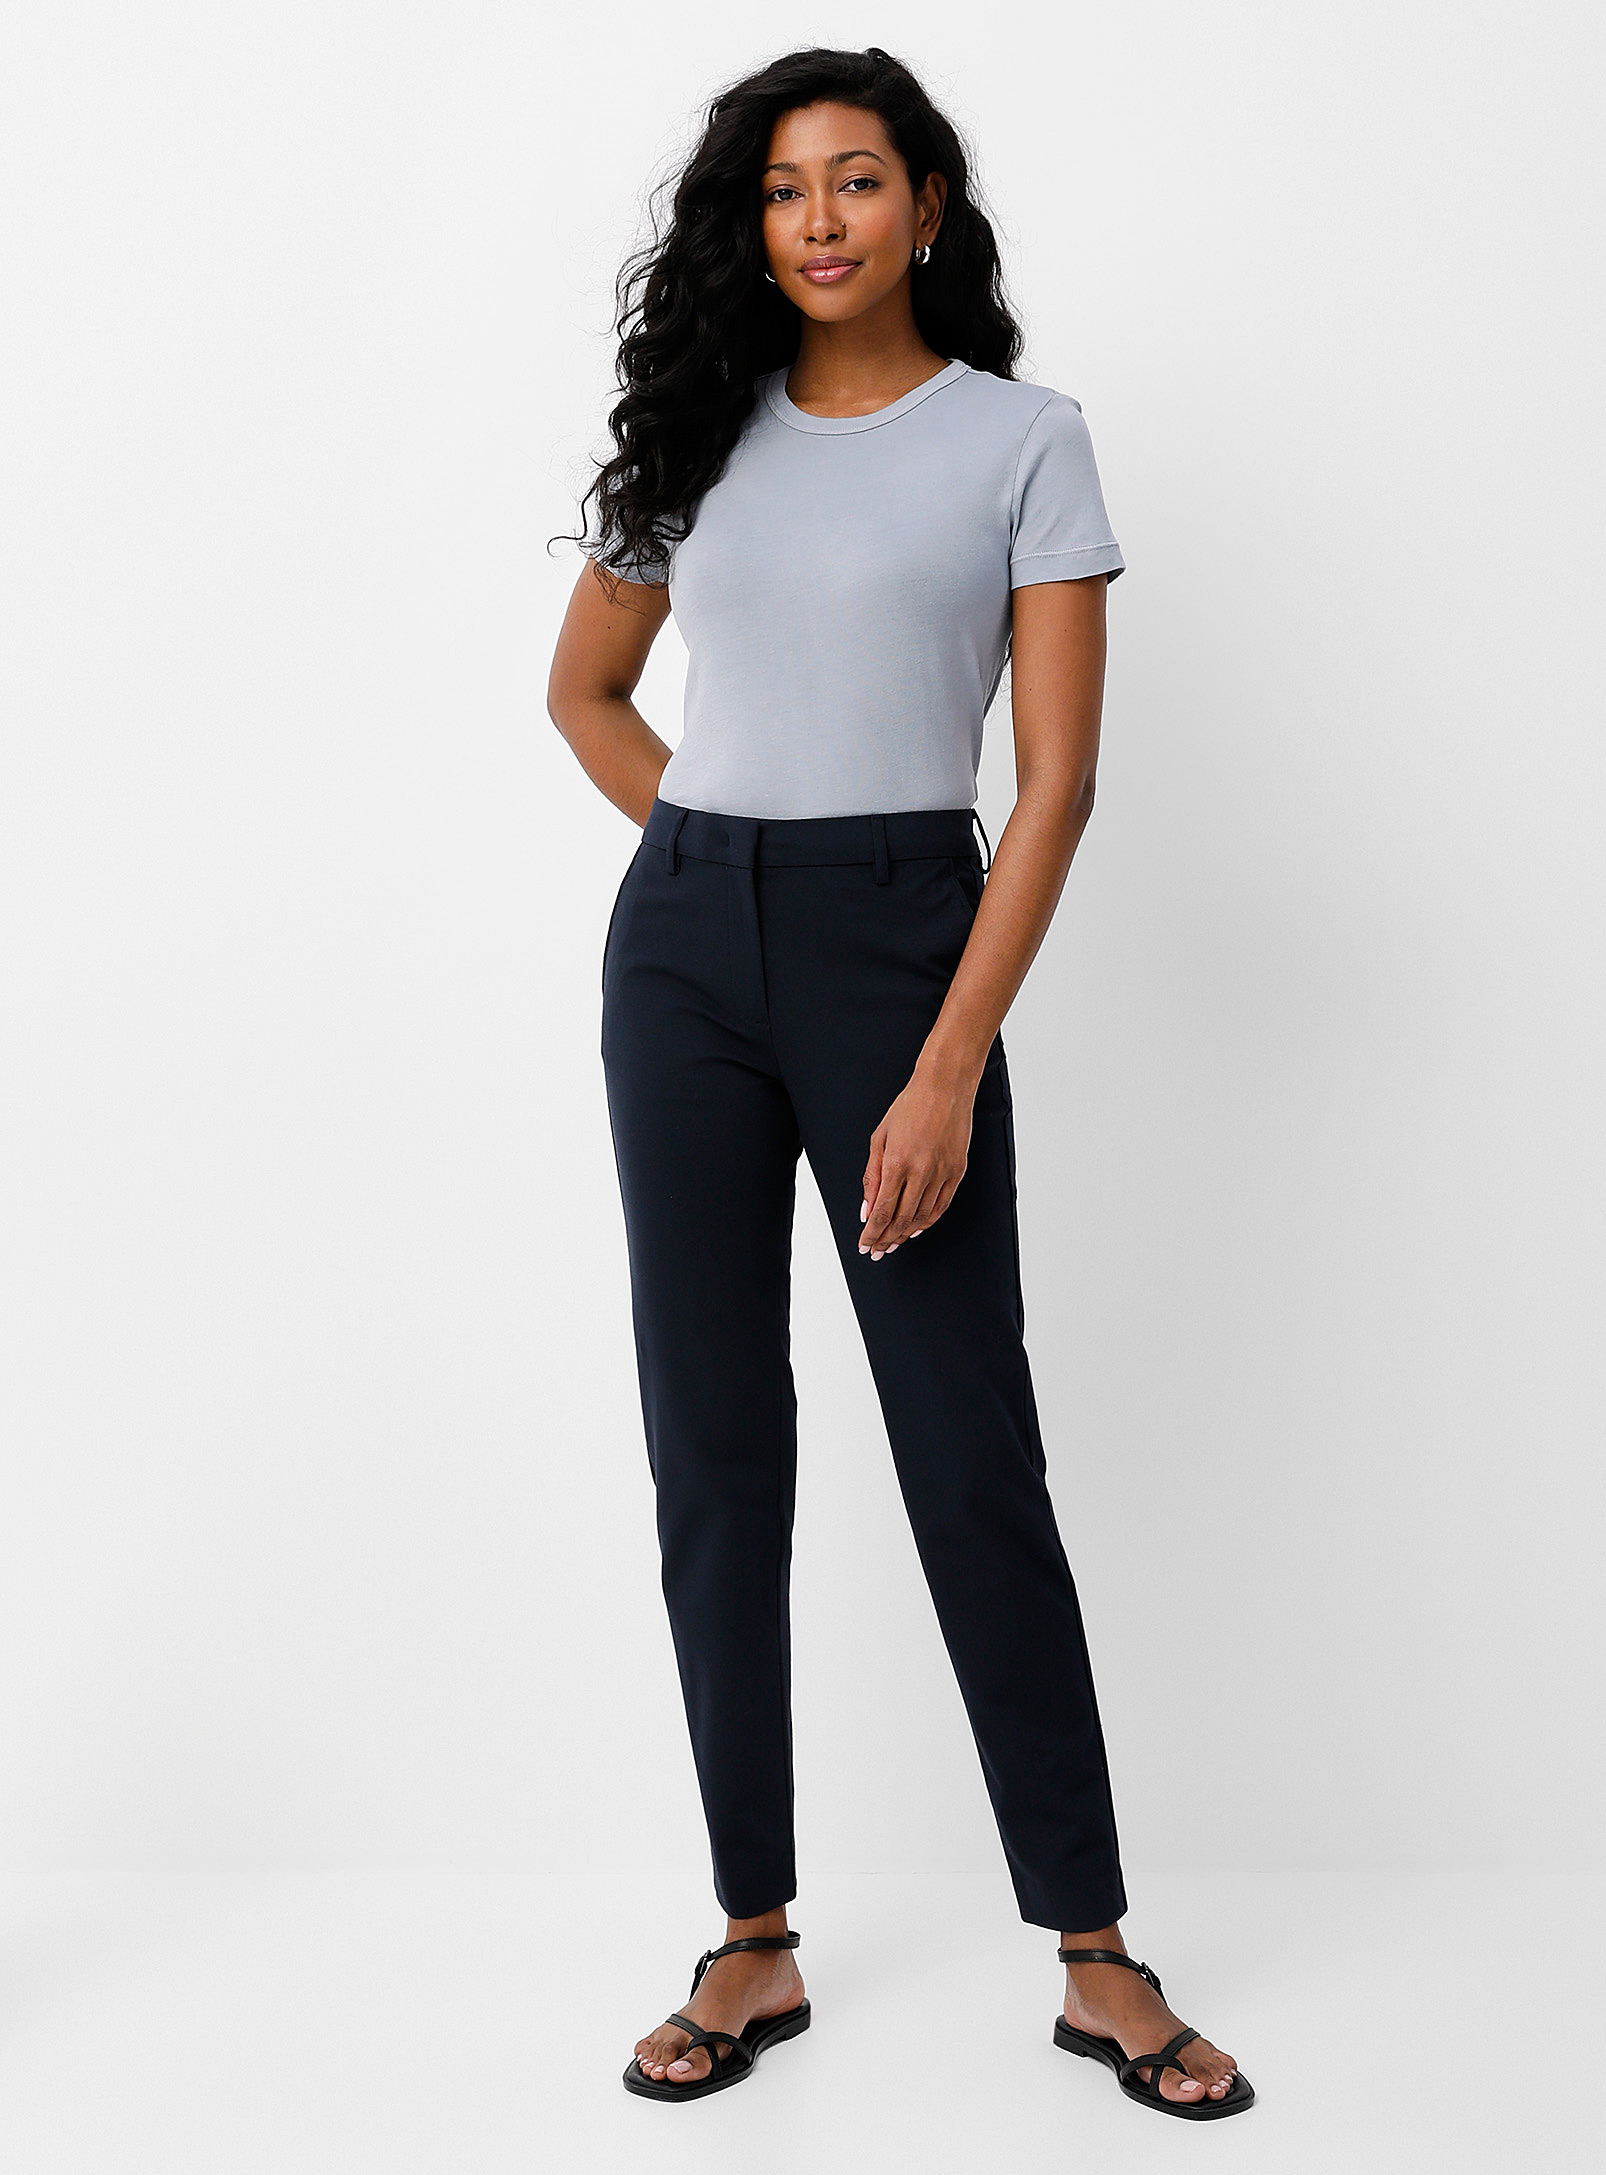 Marc O'Polo - Women's Navy structured slim-fit pant